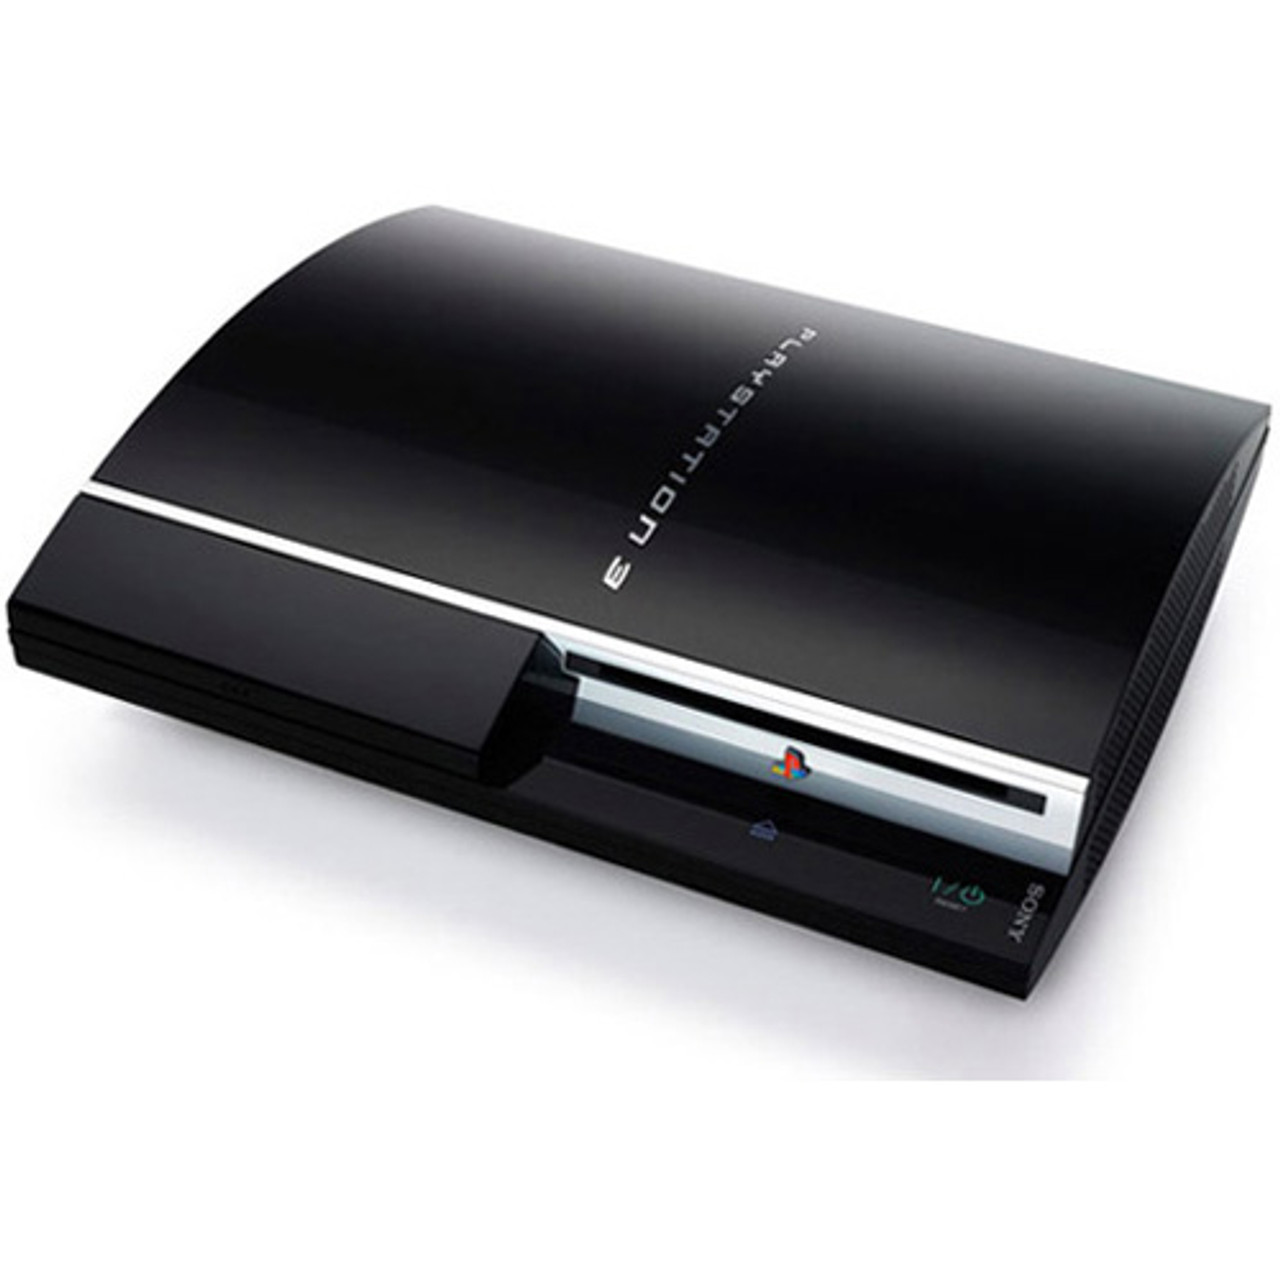 CGX  Buy & Sell Used PS3 Playstation 3 Consoles Cheap Deals On